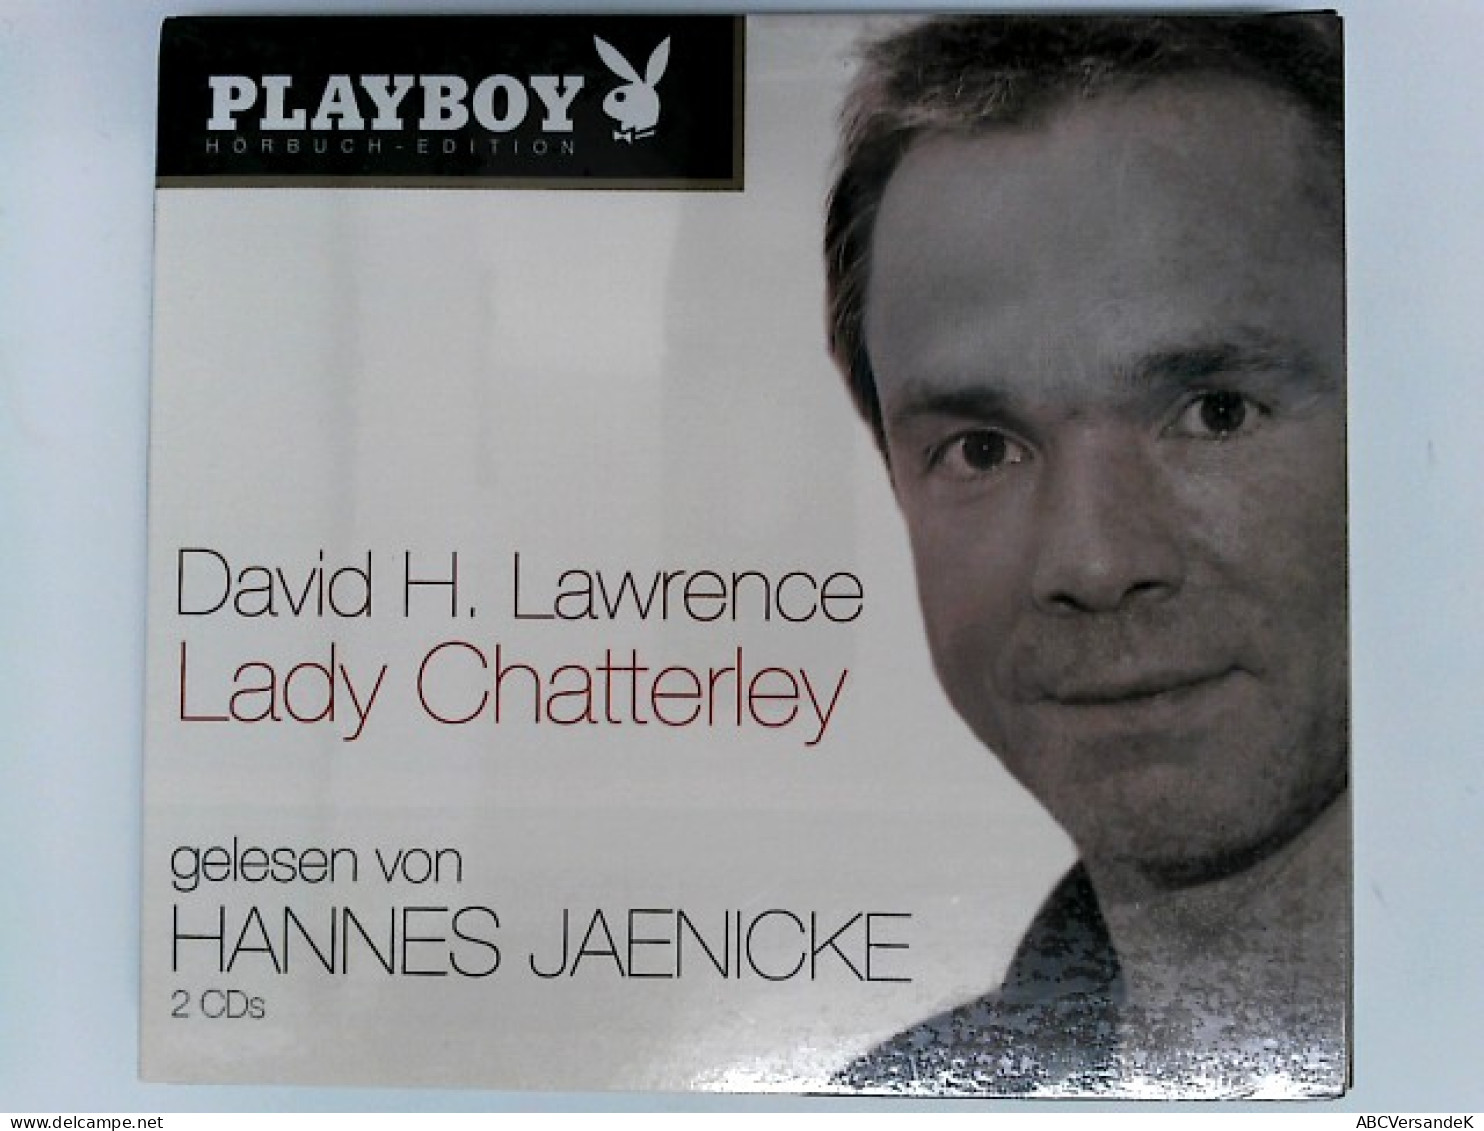 Lady Chatterley. Playboy Hörbuch-Edition, 2 Audio-CDs: Lesung - CD